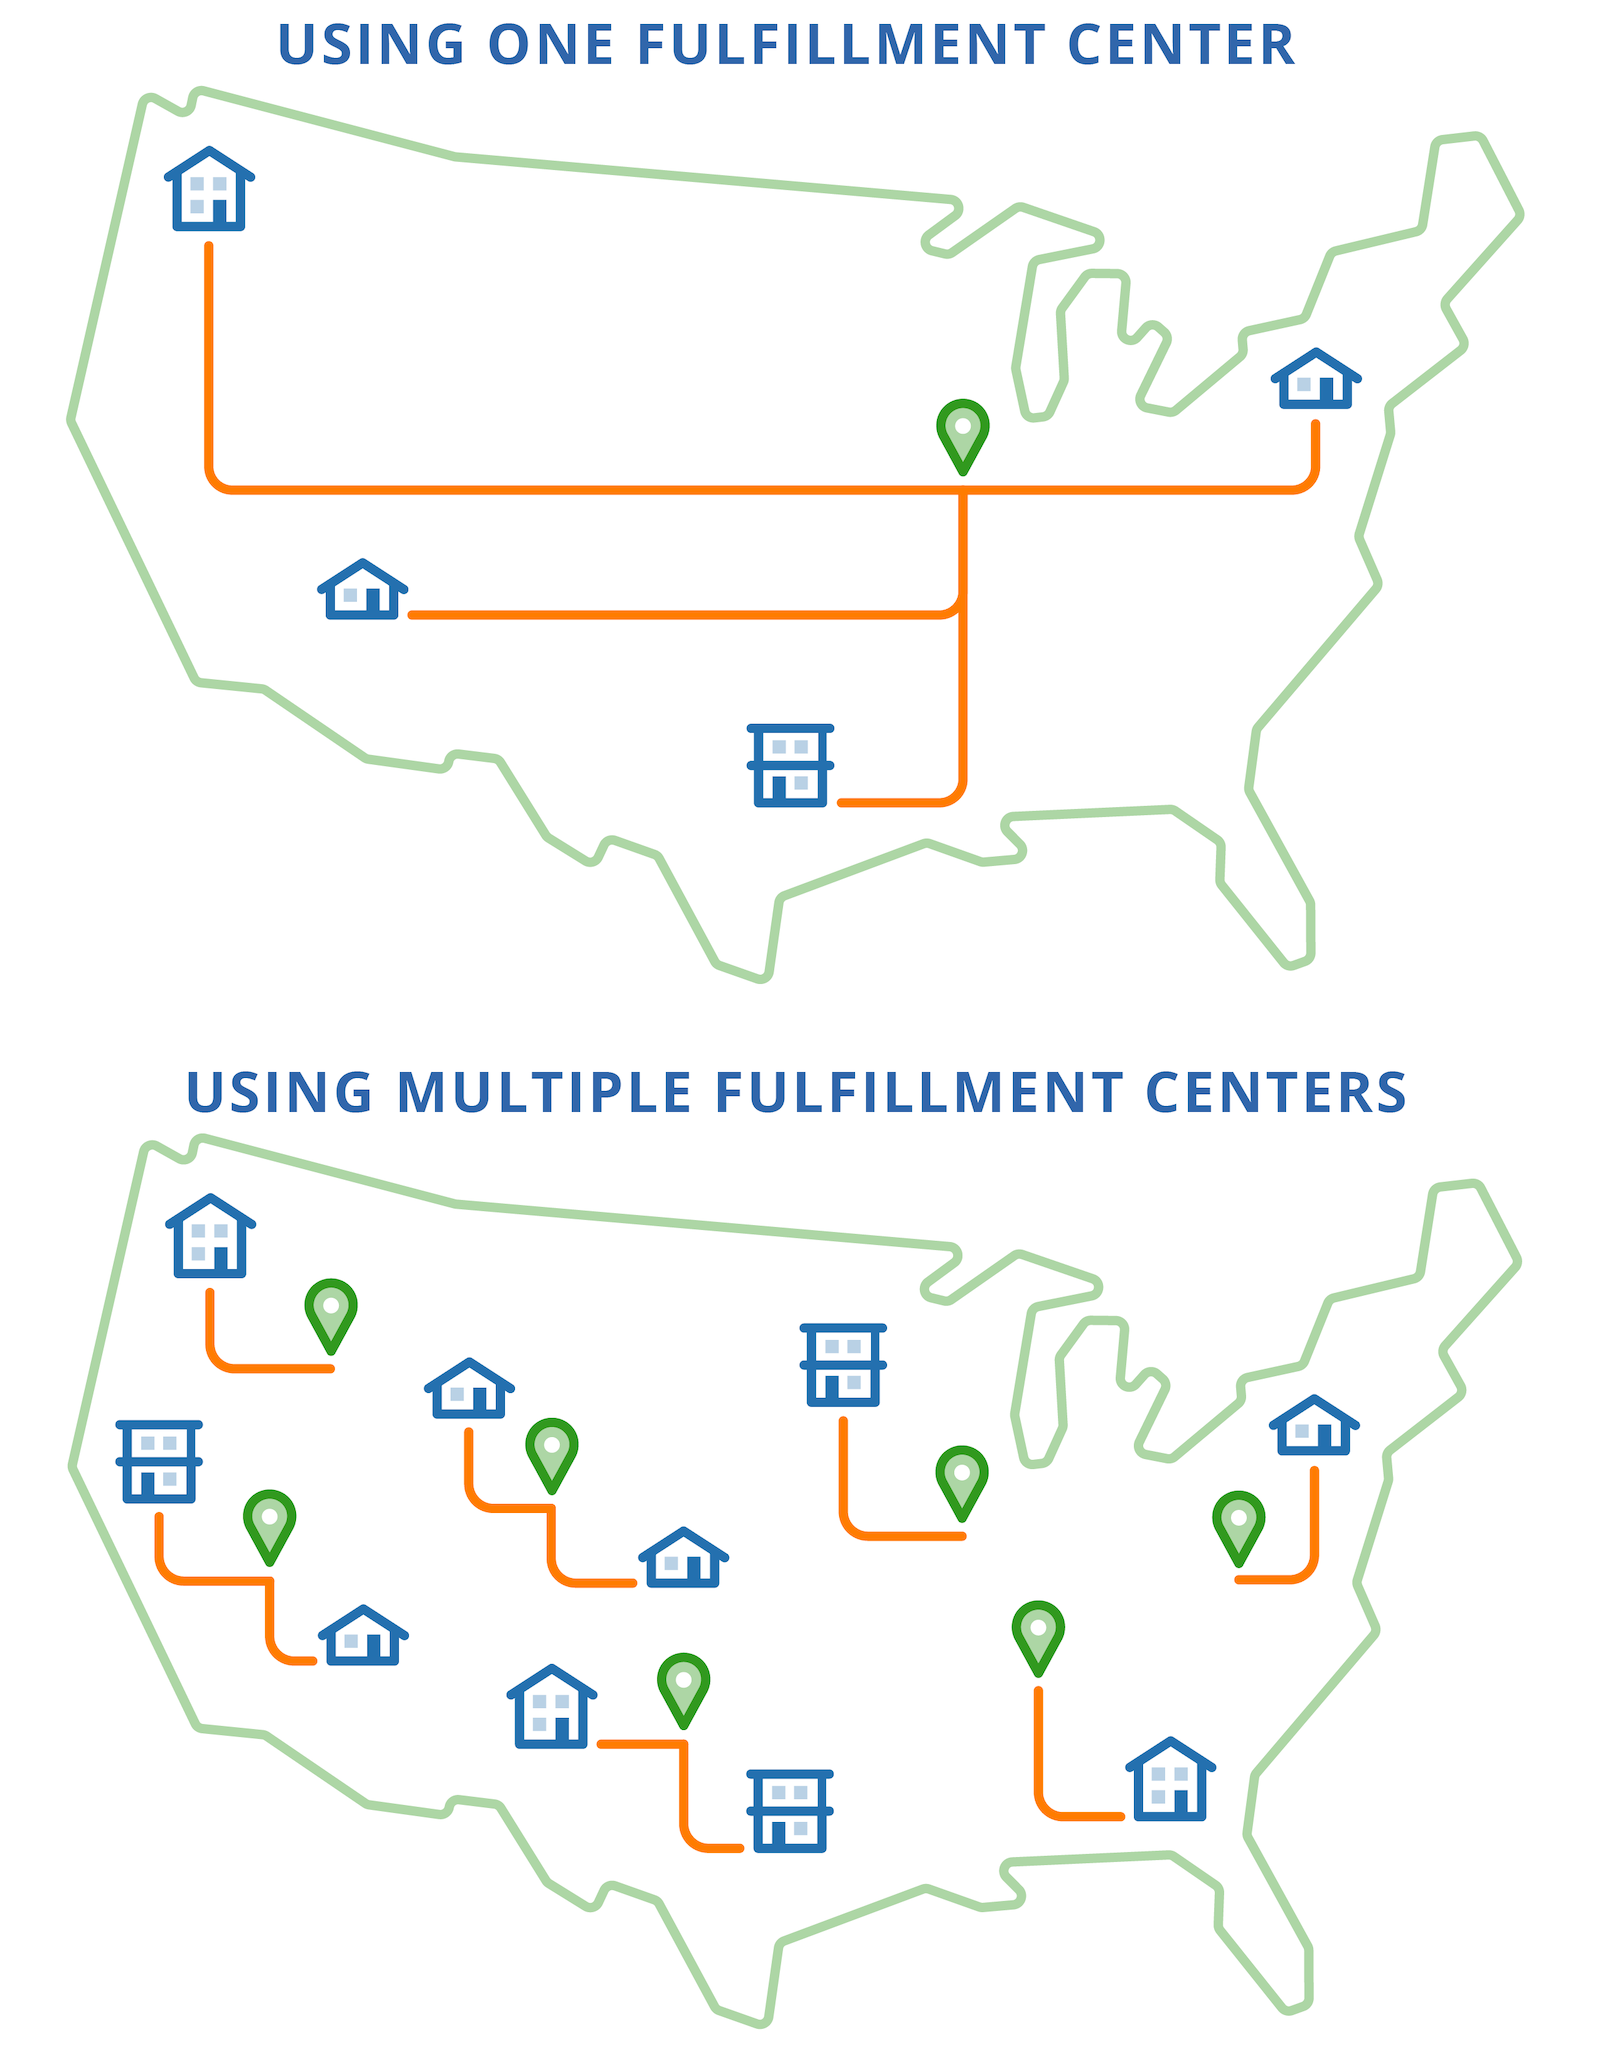 How to Choose a Fulfillment Center Location When Outsourcing to a 3PL - ShipBob